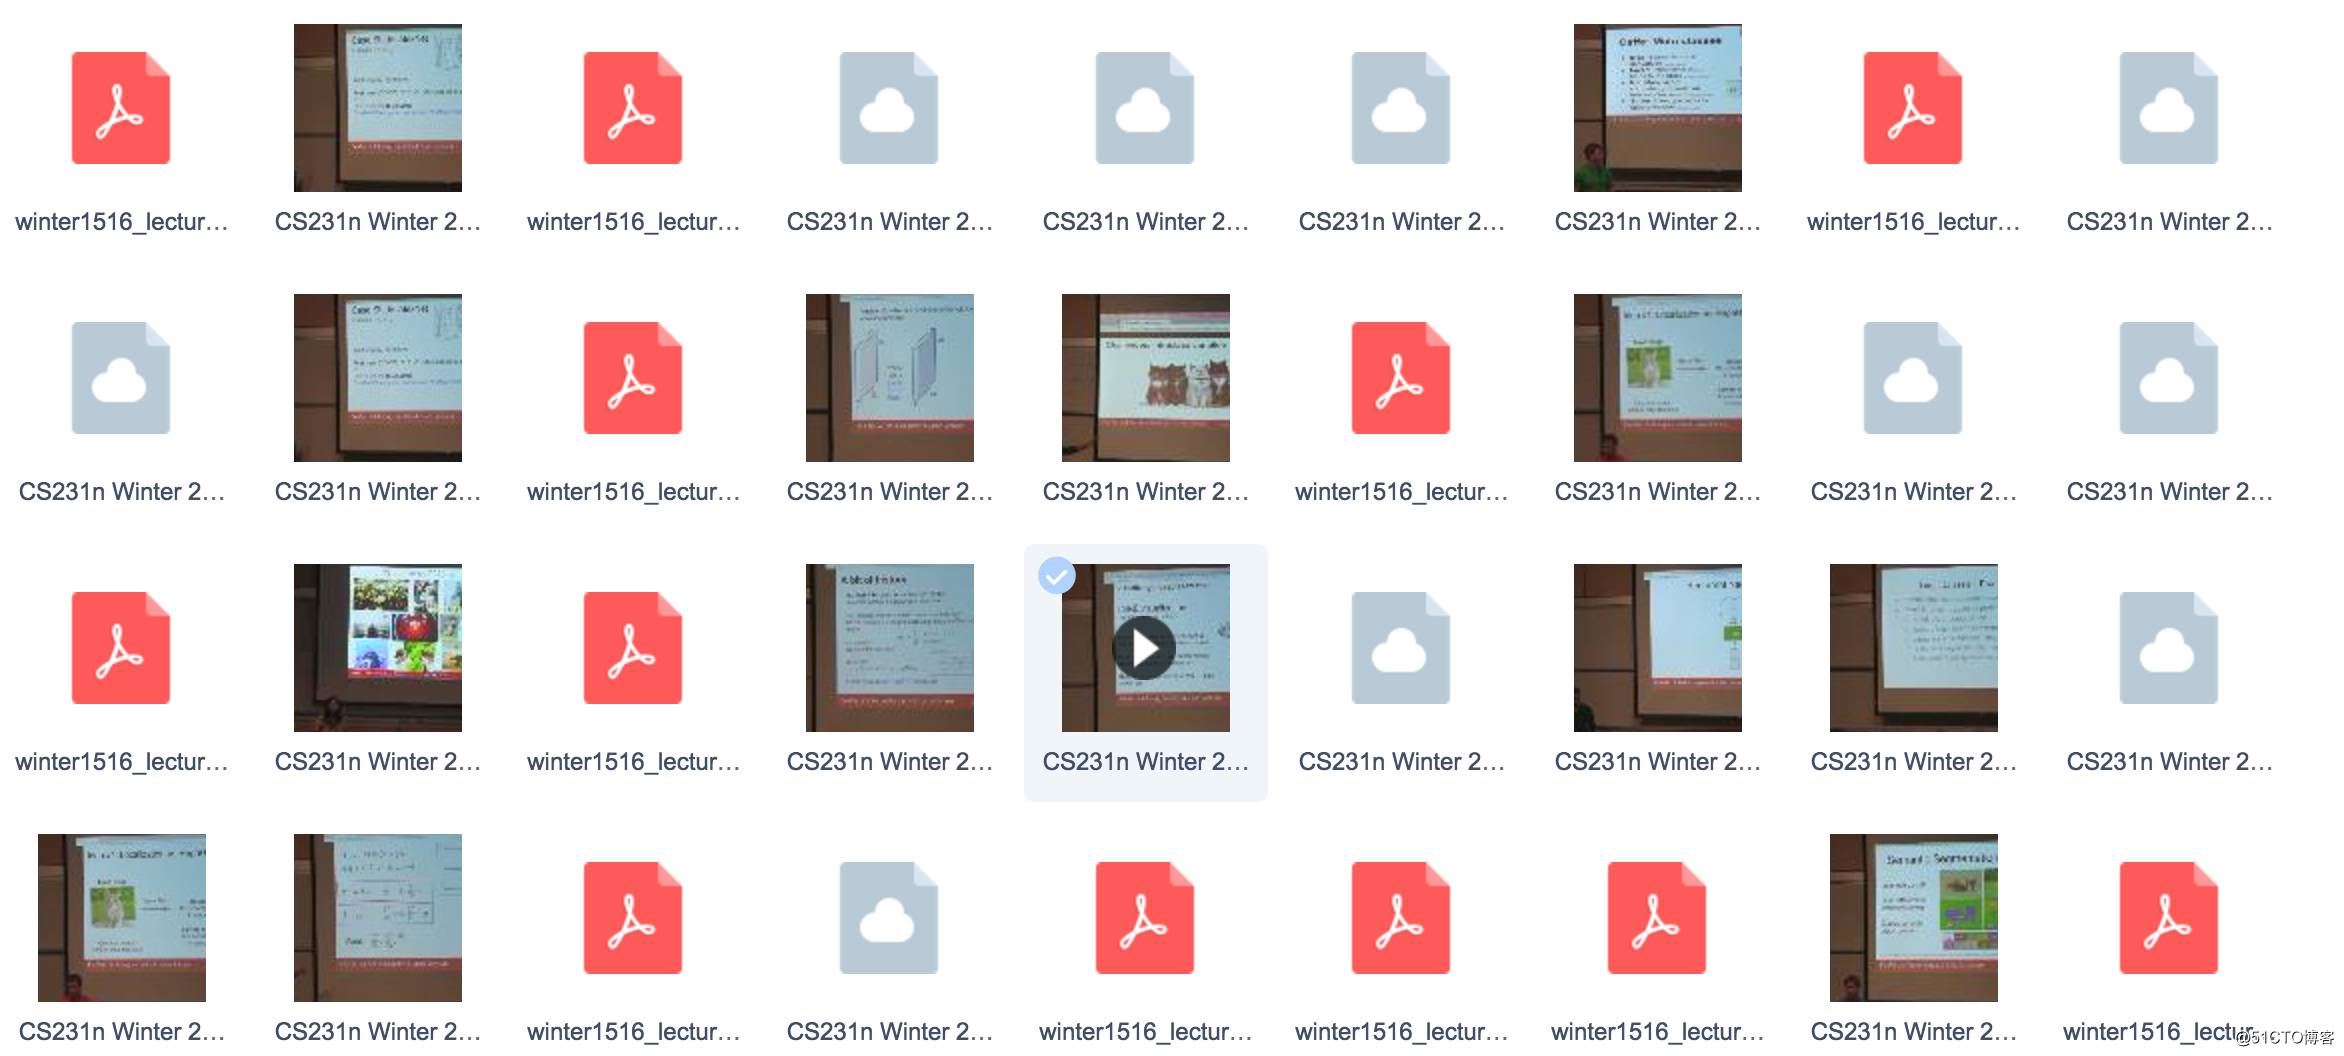 Resource Sharing|Personal Collection and Collection of Selected Video Tutorial Resources